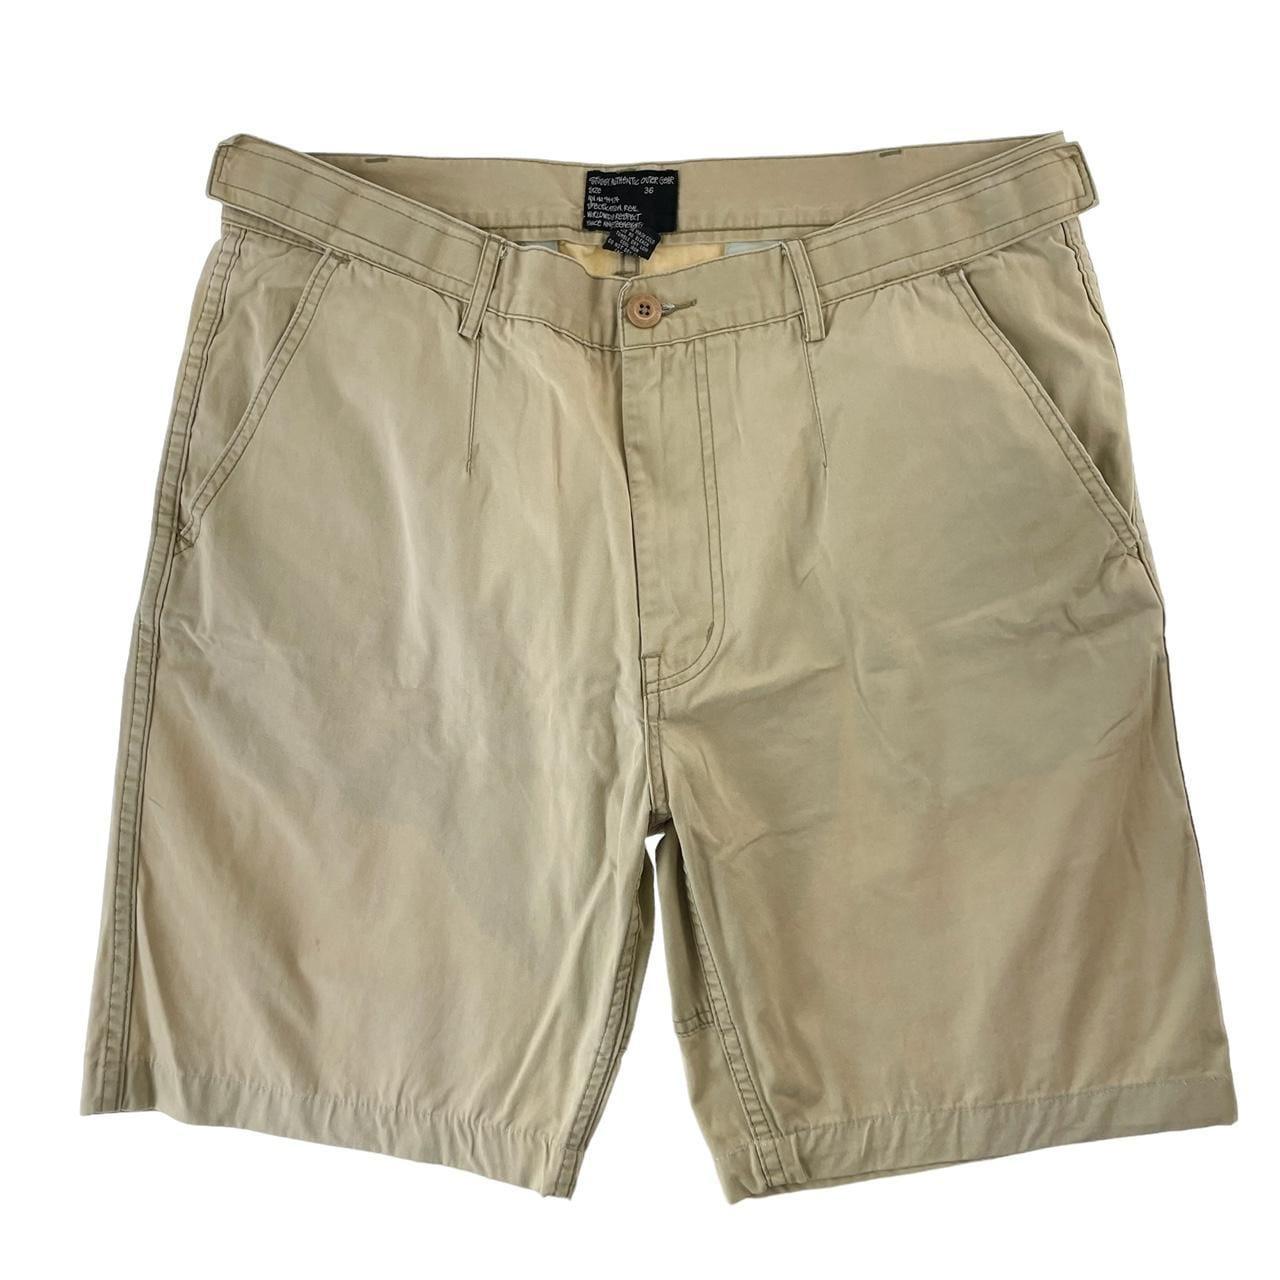 Vintage Stussy shorts W36 - Known Source